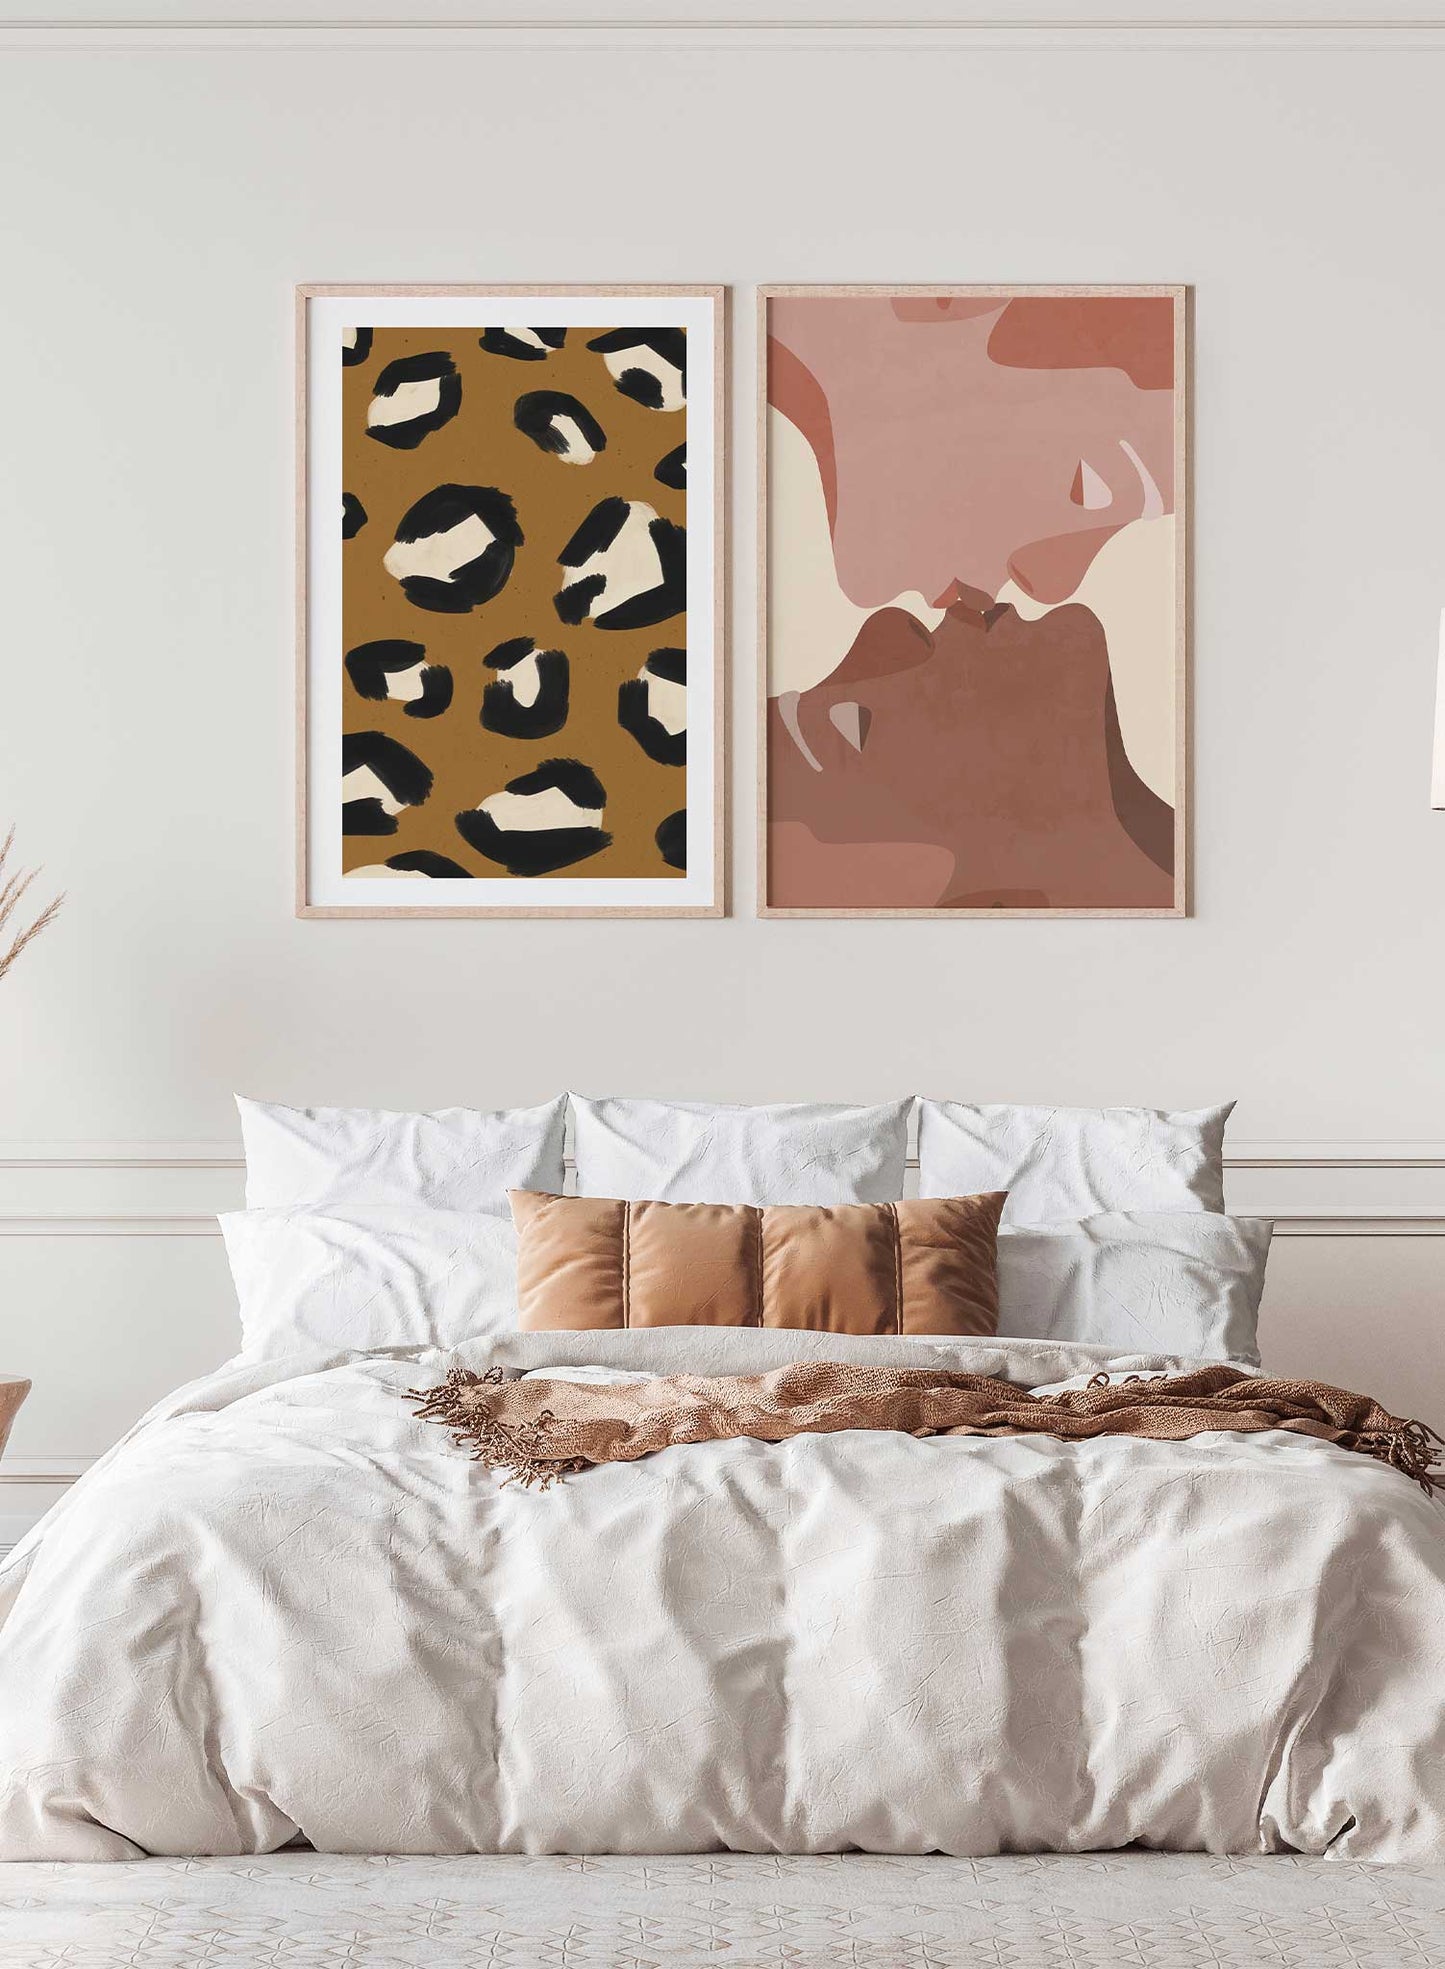 Cheetah Print is a minimalist illustration of the close-up view of a cheetah print by Opposite Wall.